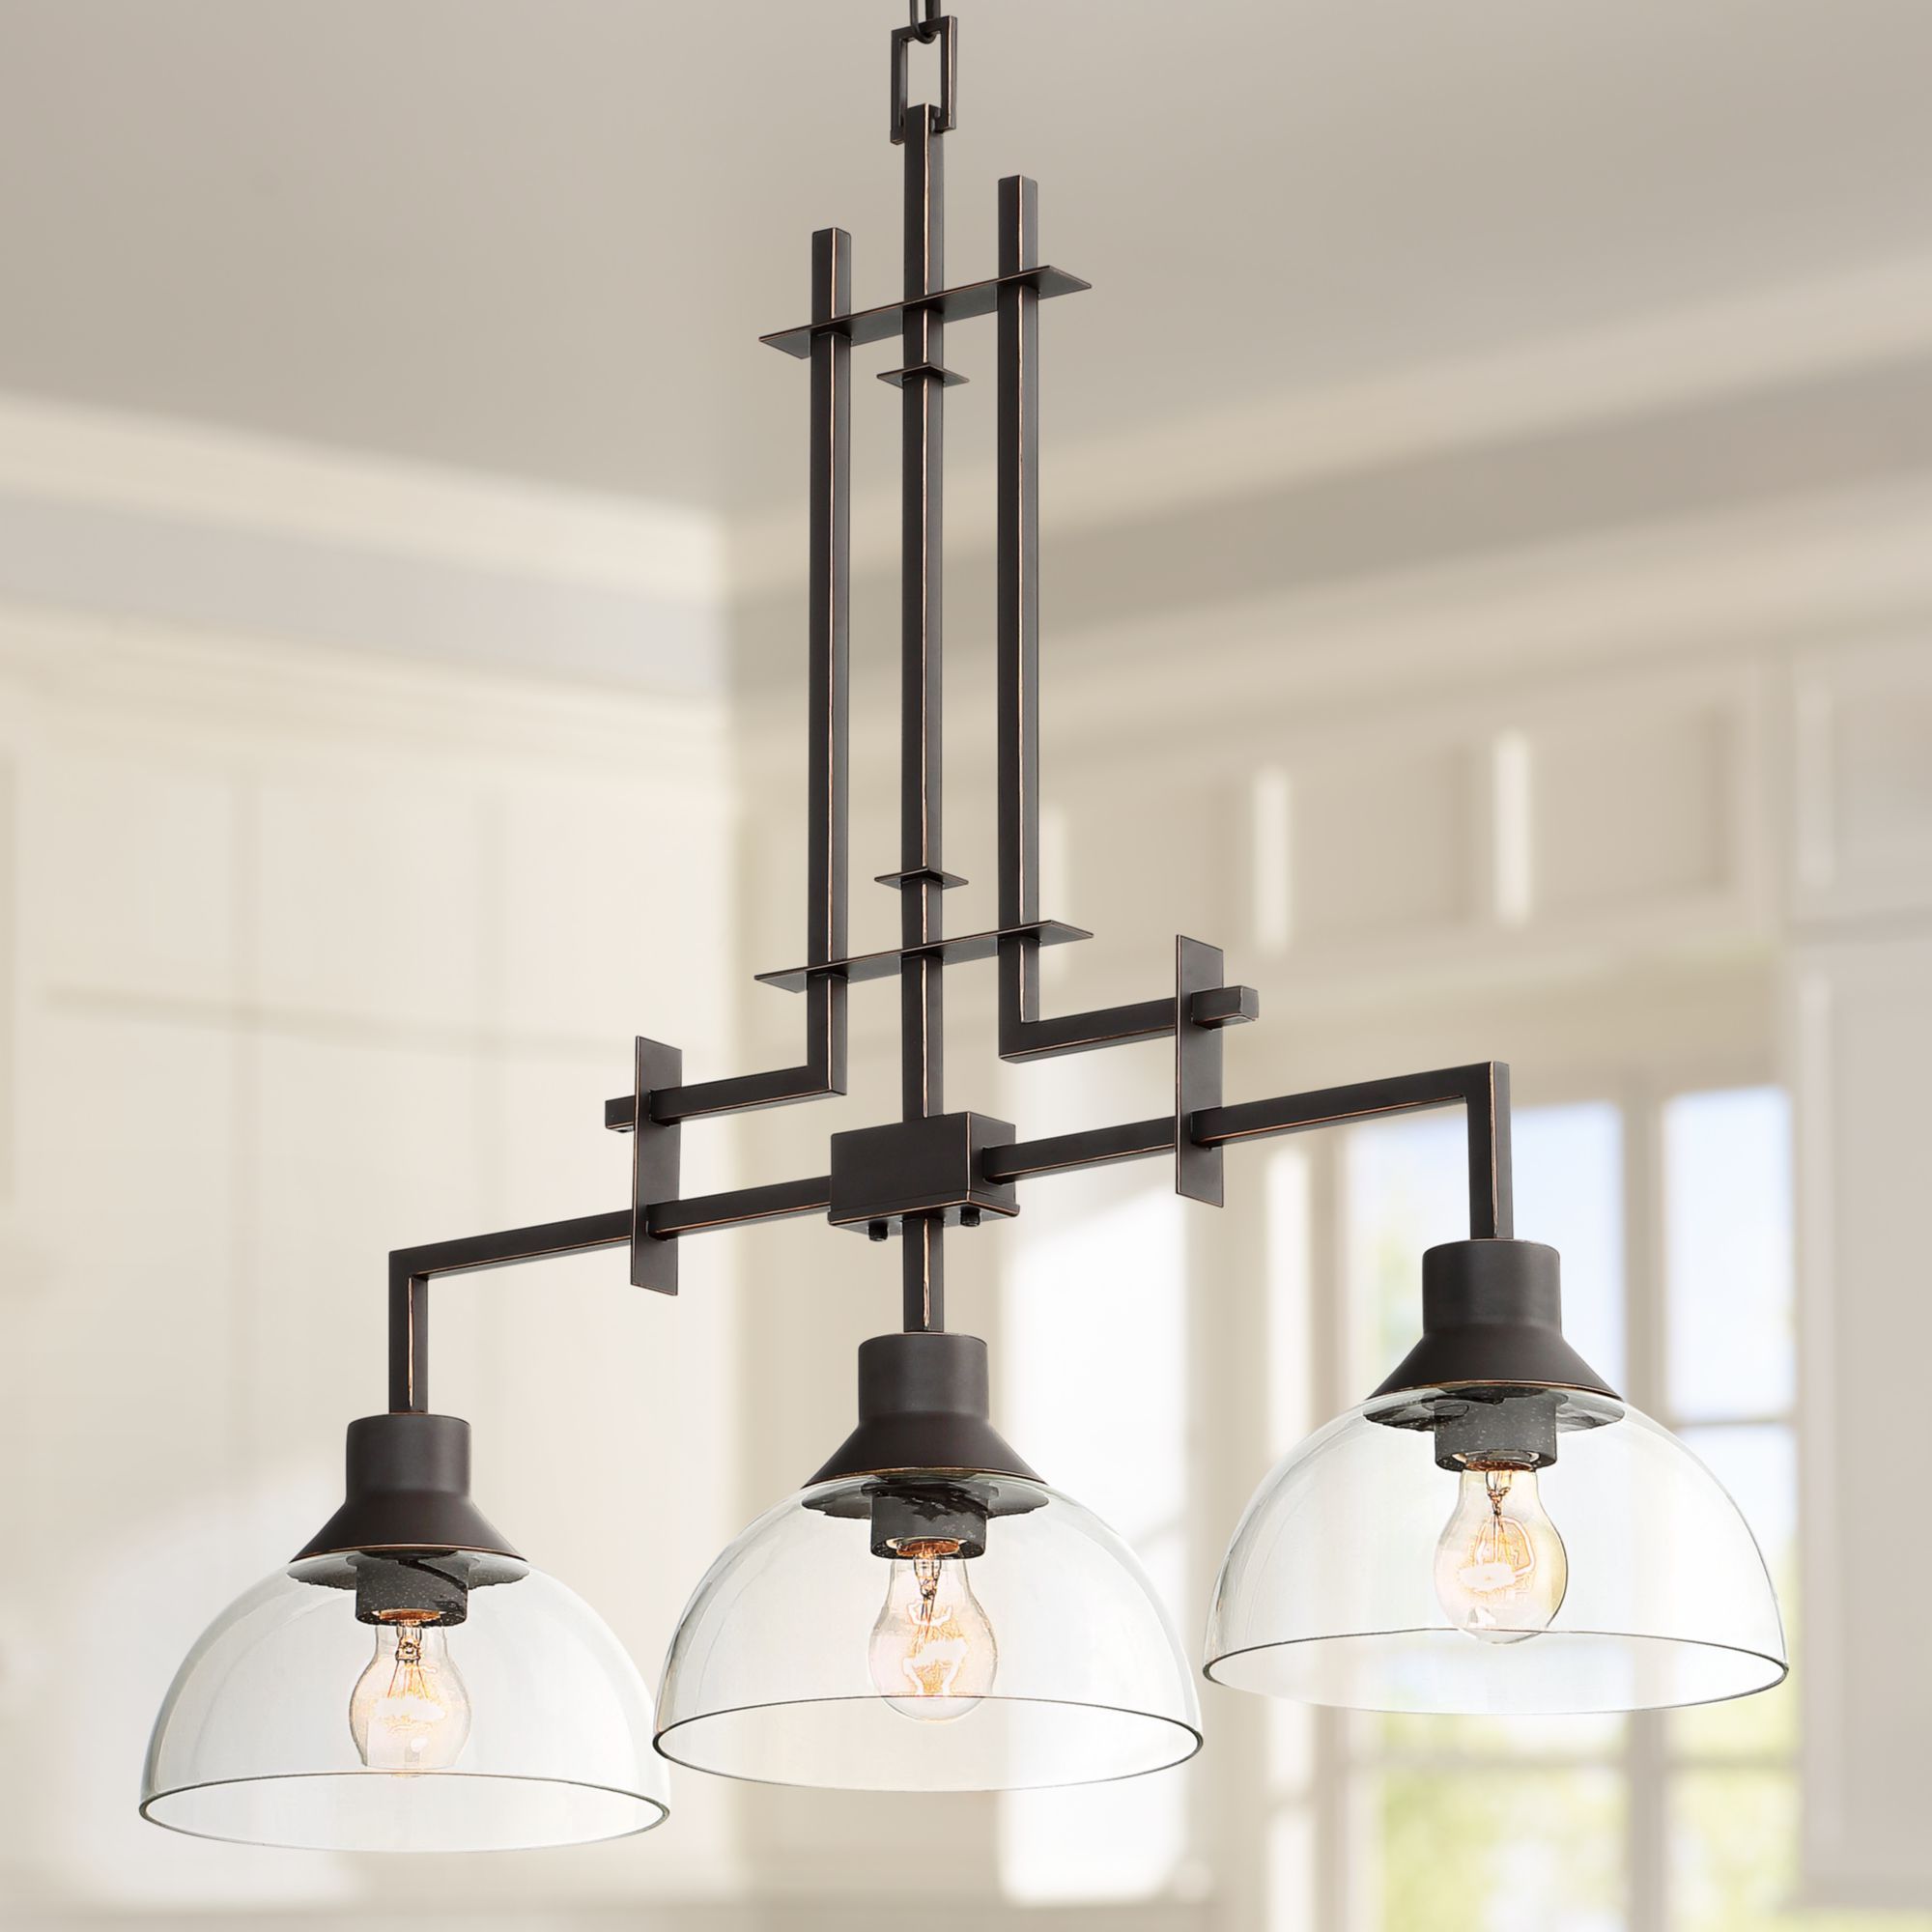 Franklin Iron Works Polished Bronze Linear Pendant With Popular Bronze Metal Chandeliers (View 9 of 20)